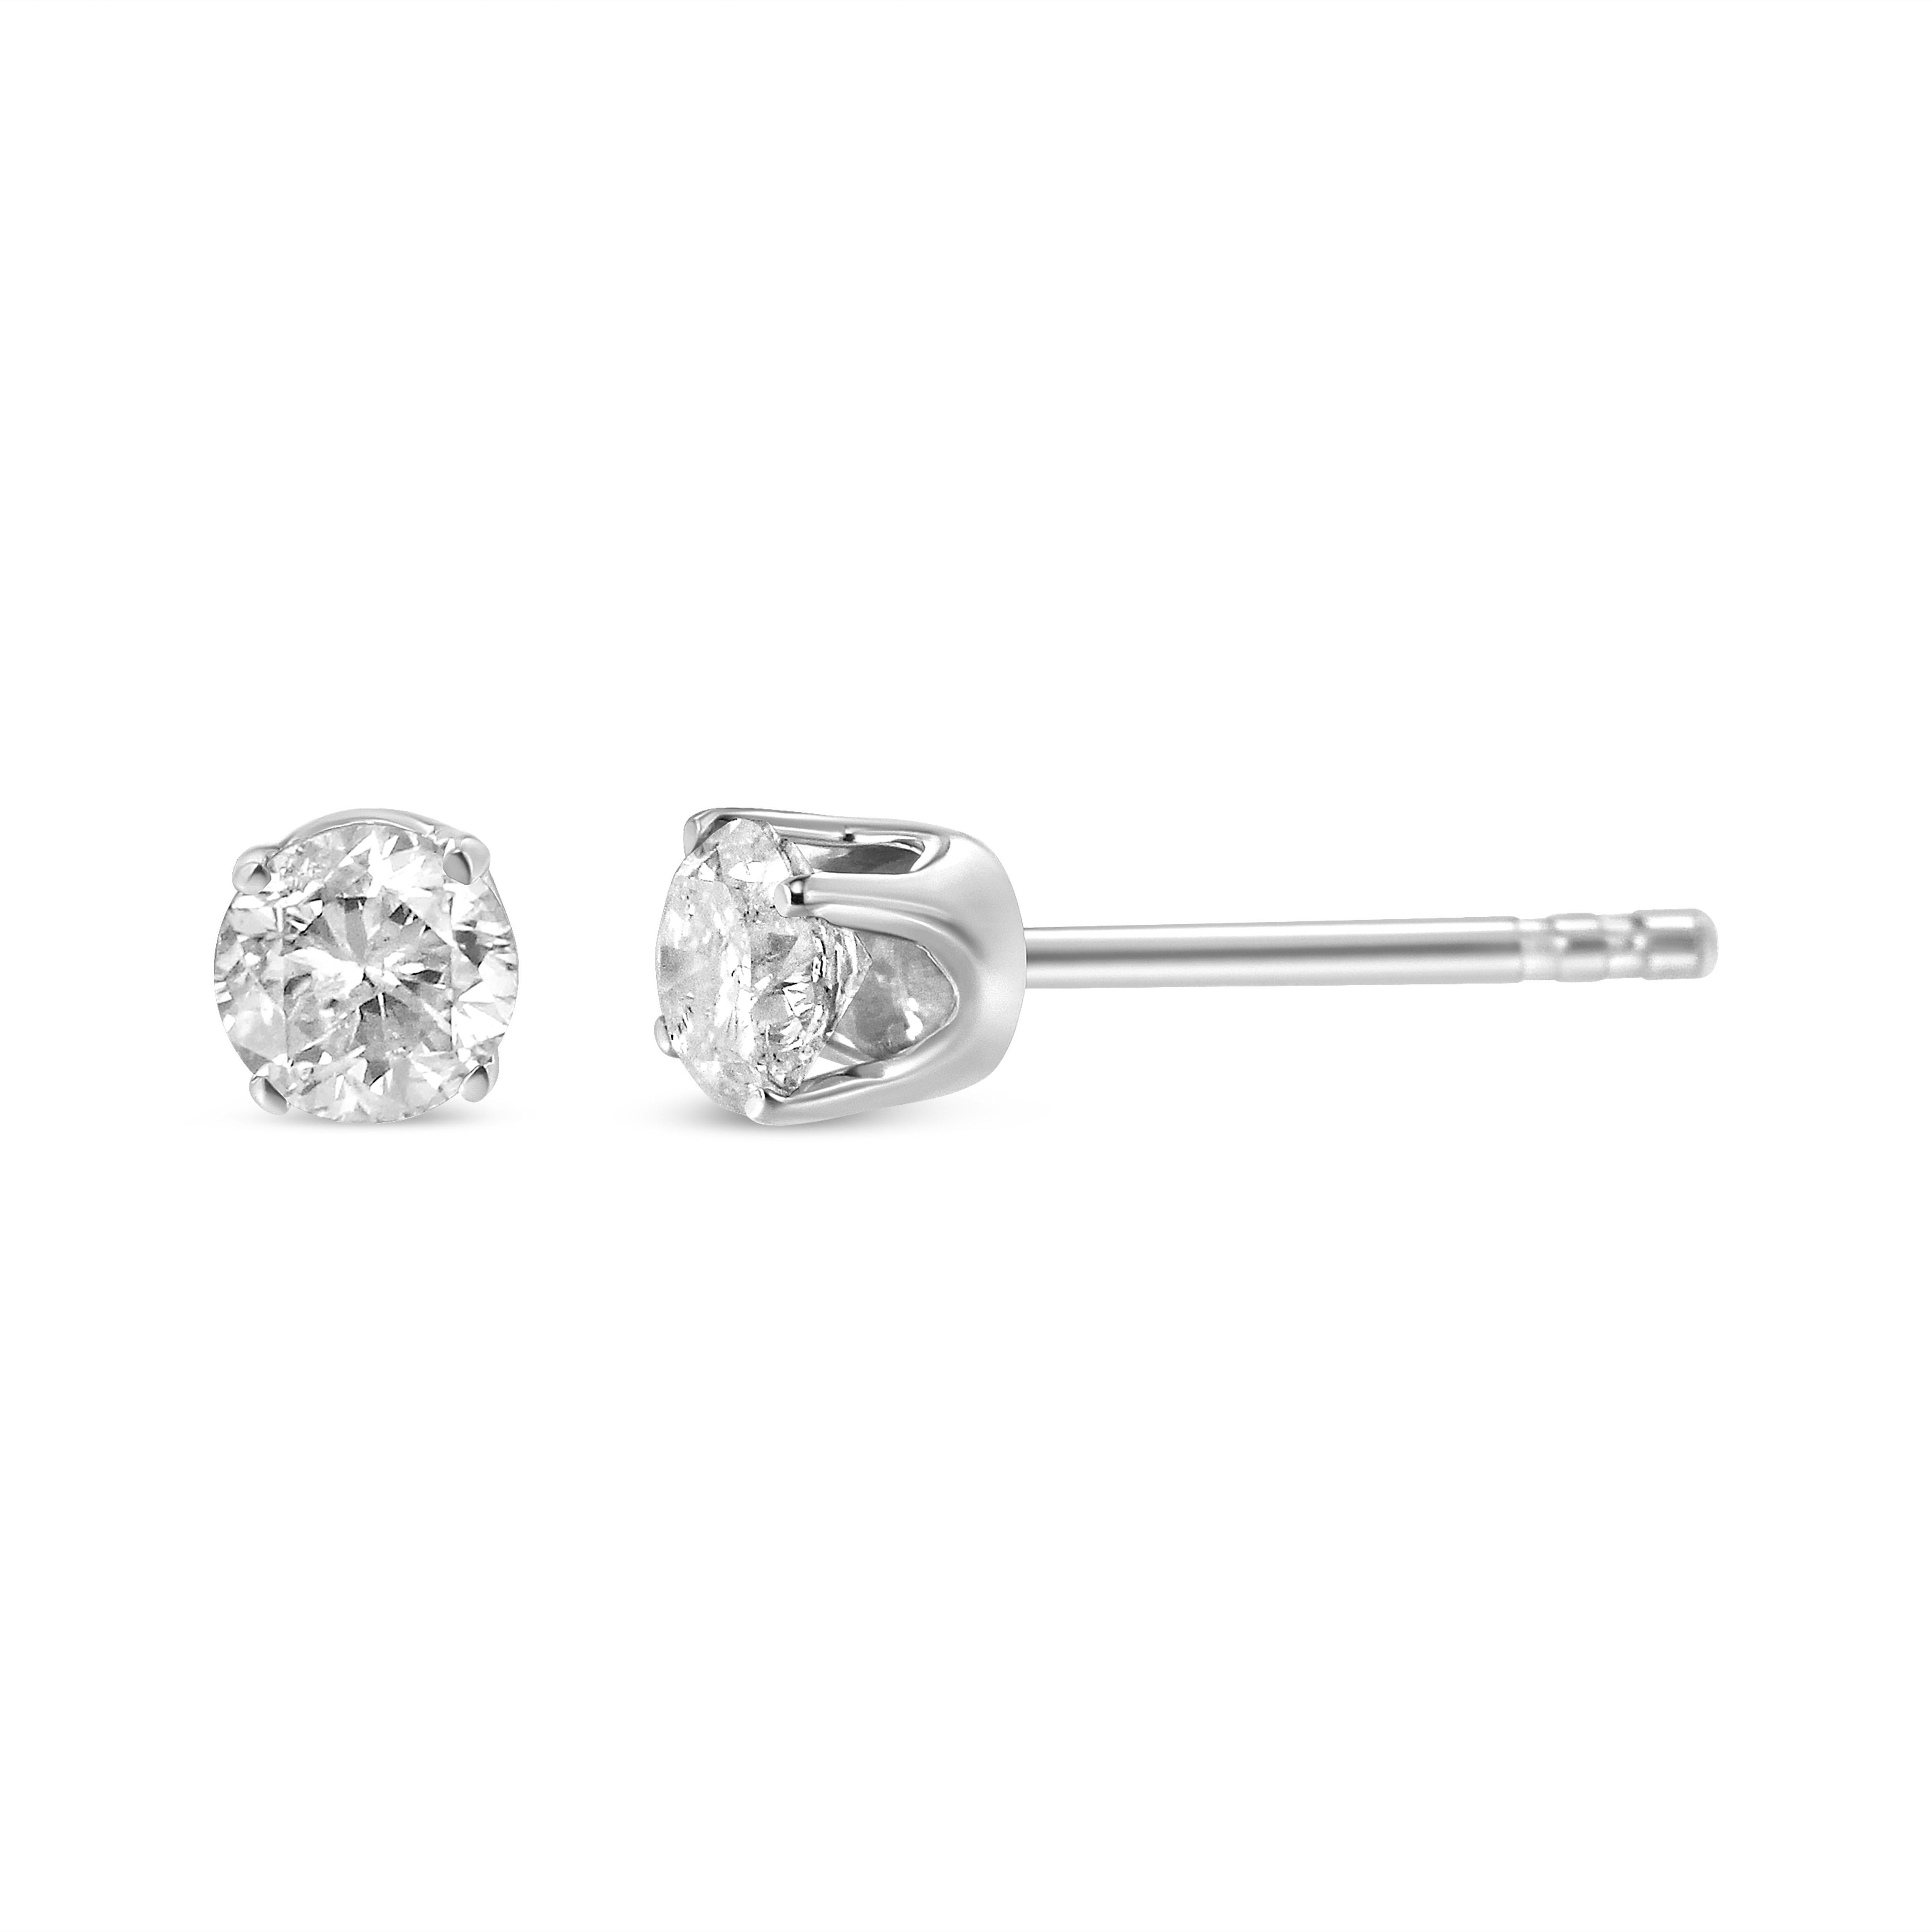 Contemporary AGS Certified 14K White Gold 1.00 Carat Diamond Push Back Stud Earrings For Sale